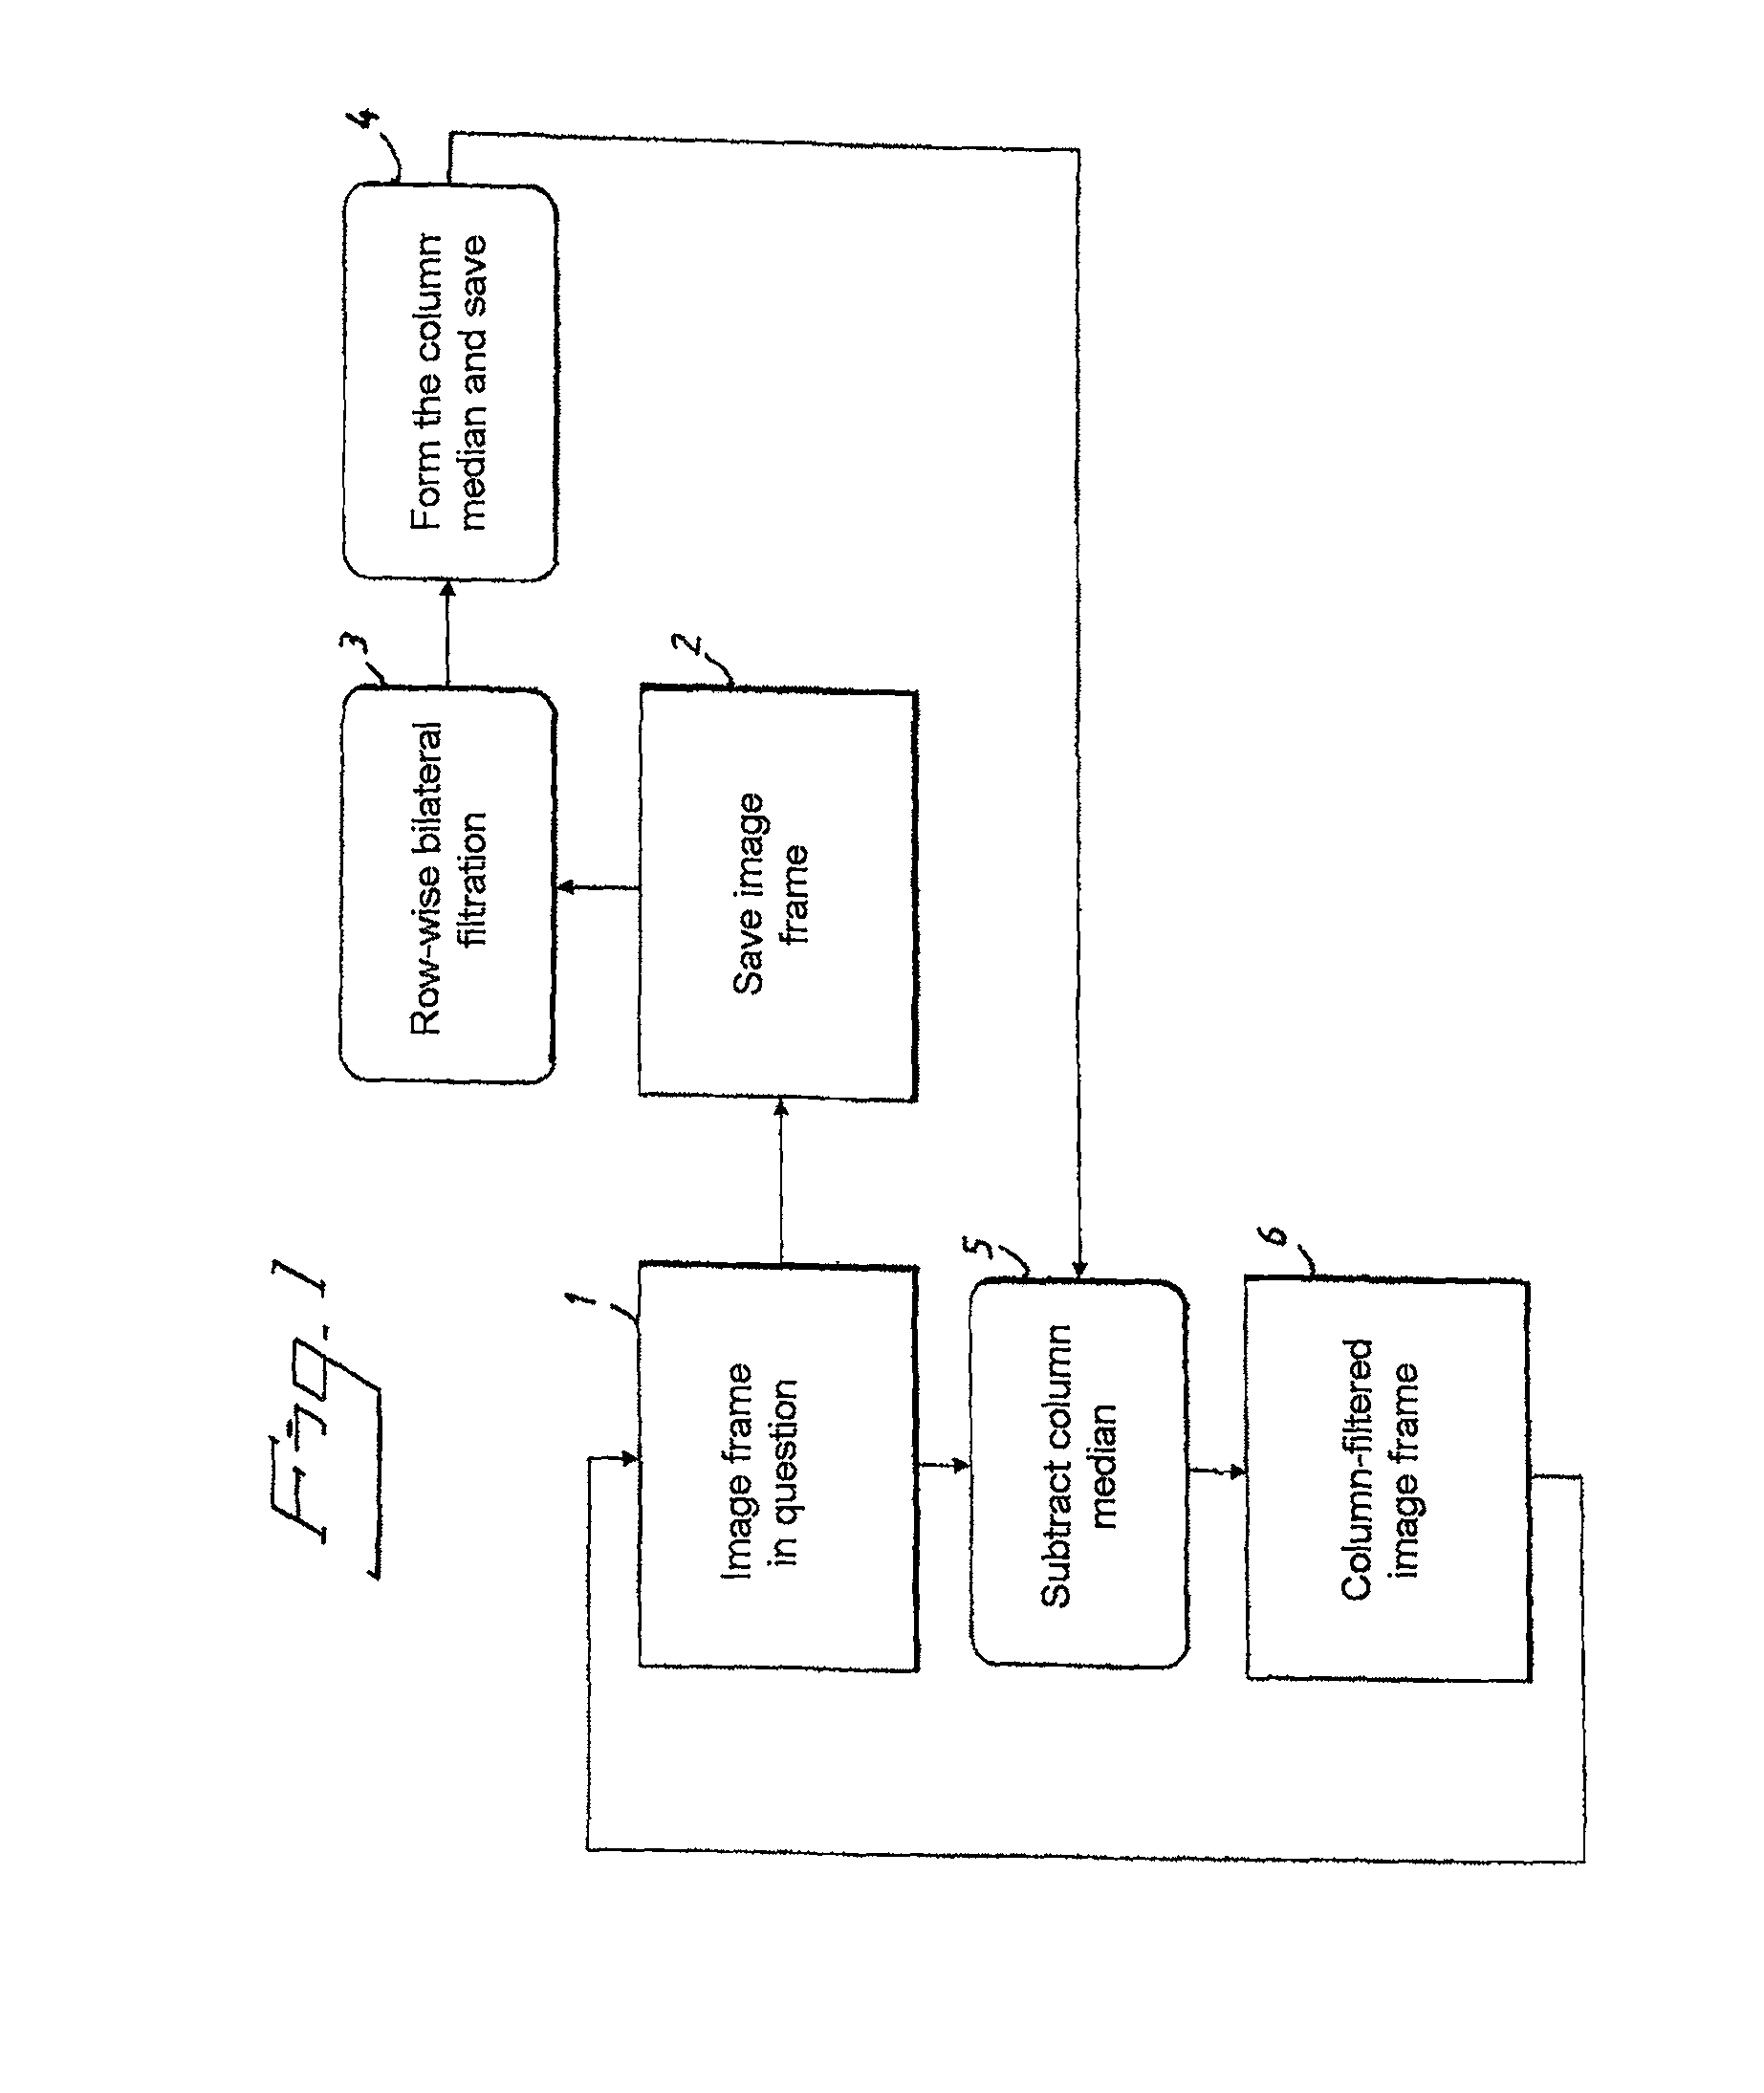 Image processing method for suppressing spatio-temporal column or row noise